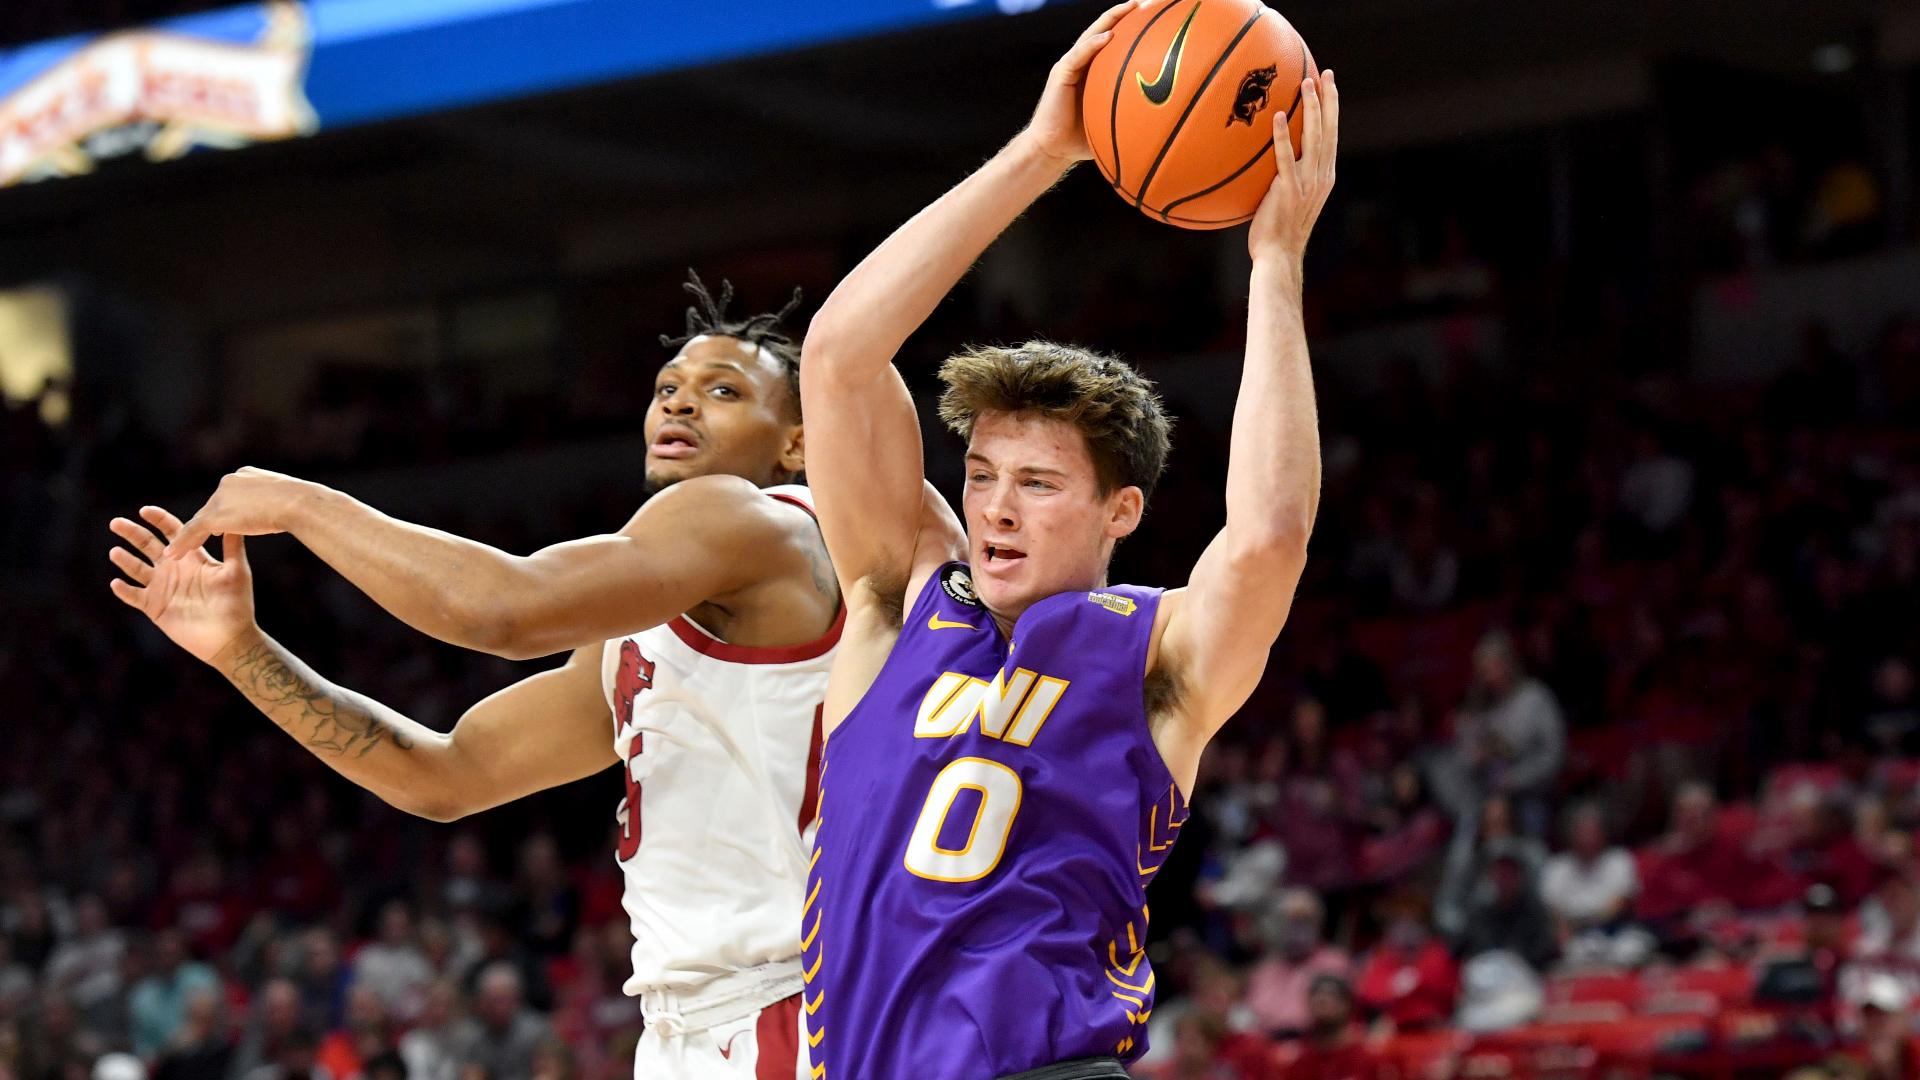 The fifth-year senior comes from the University of Northern Iowa as a grad transfer.